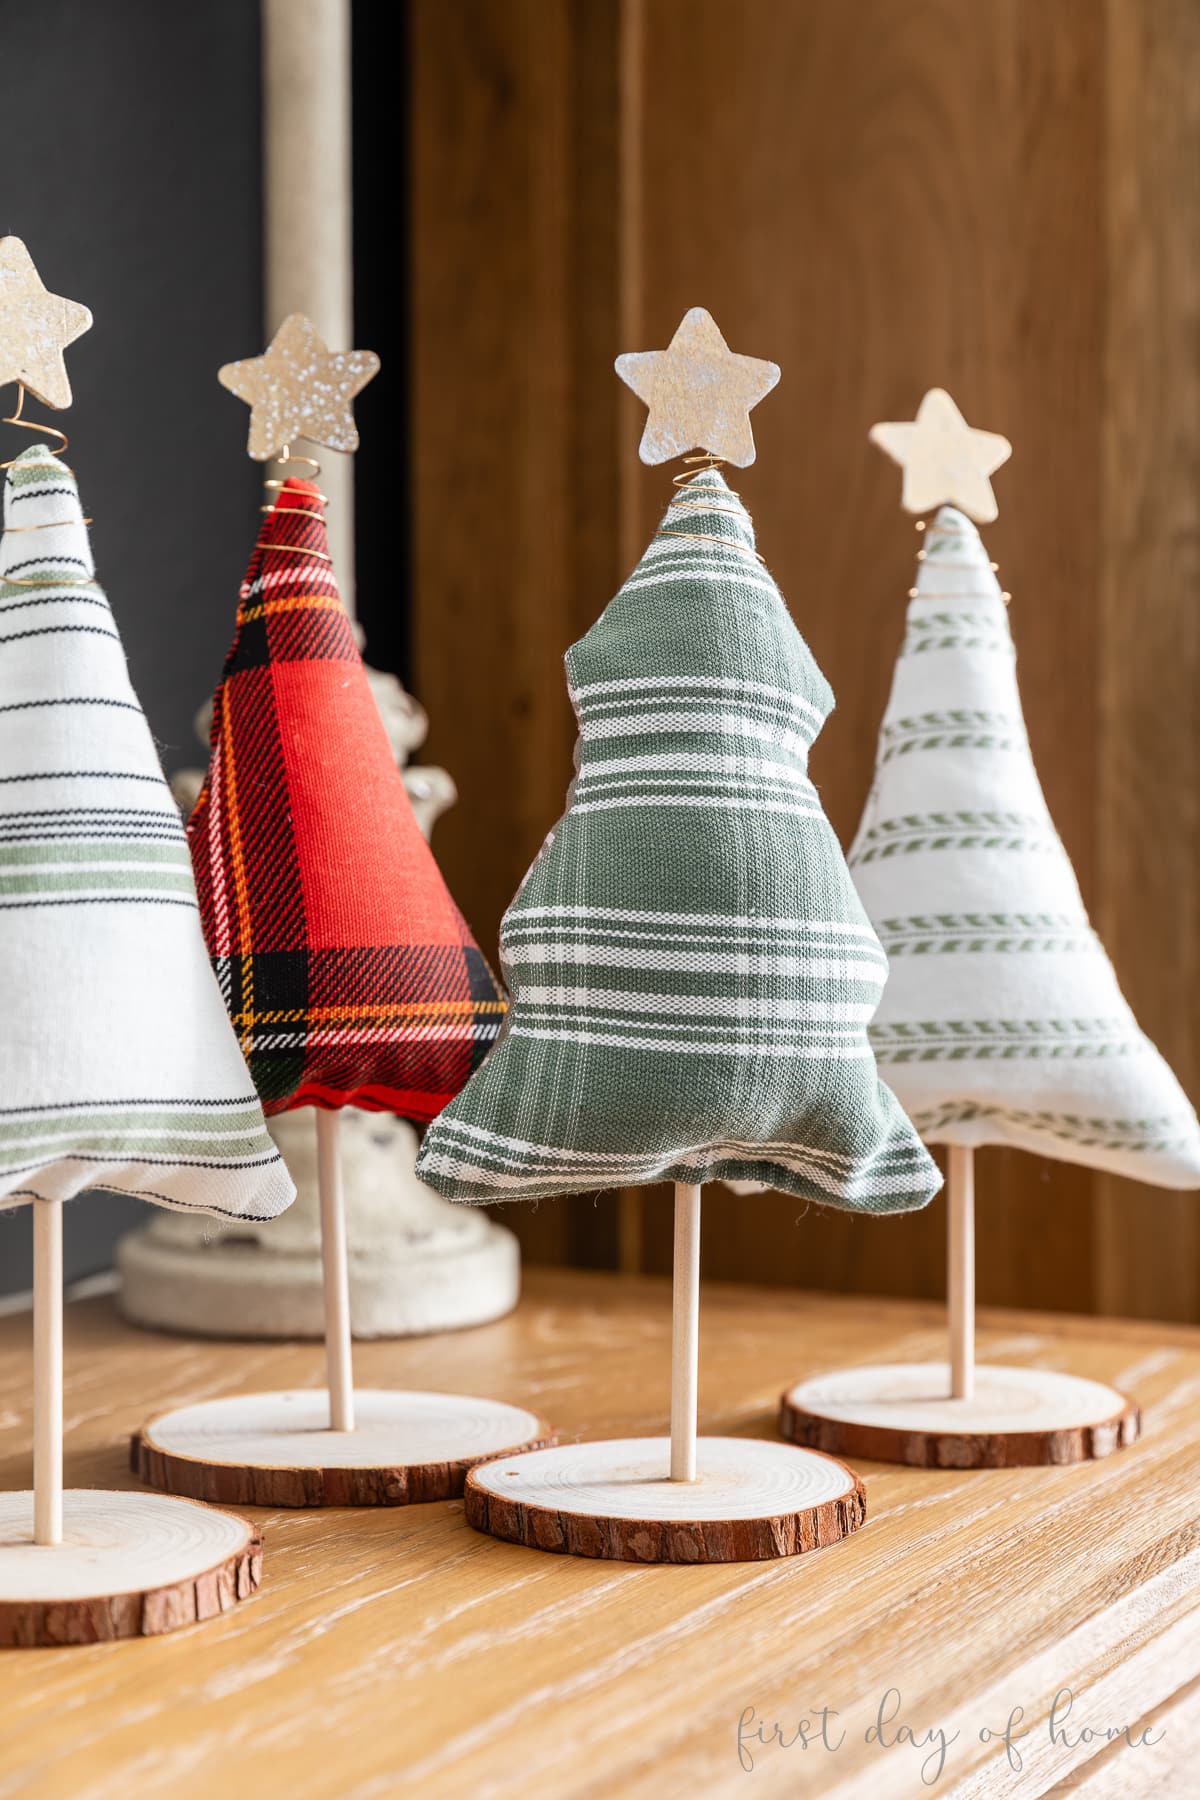 Four fabric Christmas trees on stands with wood slice bases and topped with sparkly star tree toppers.